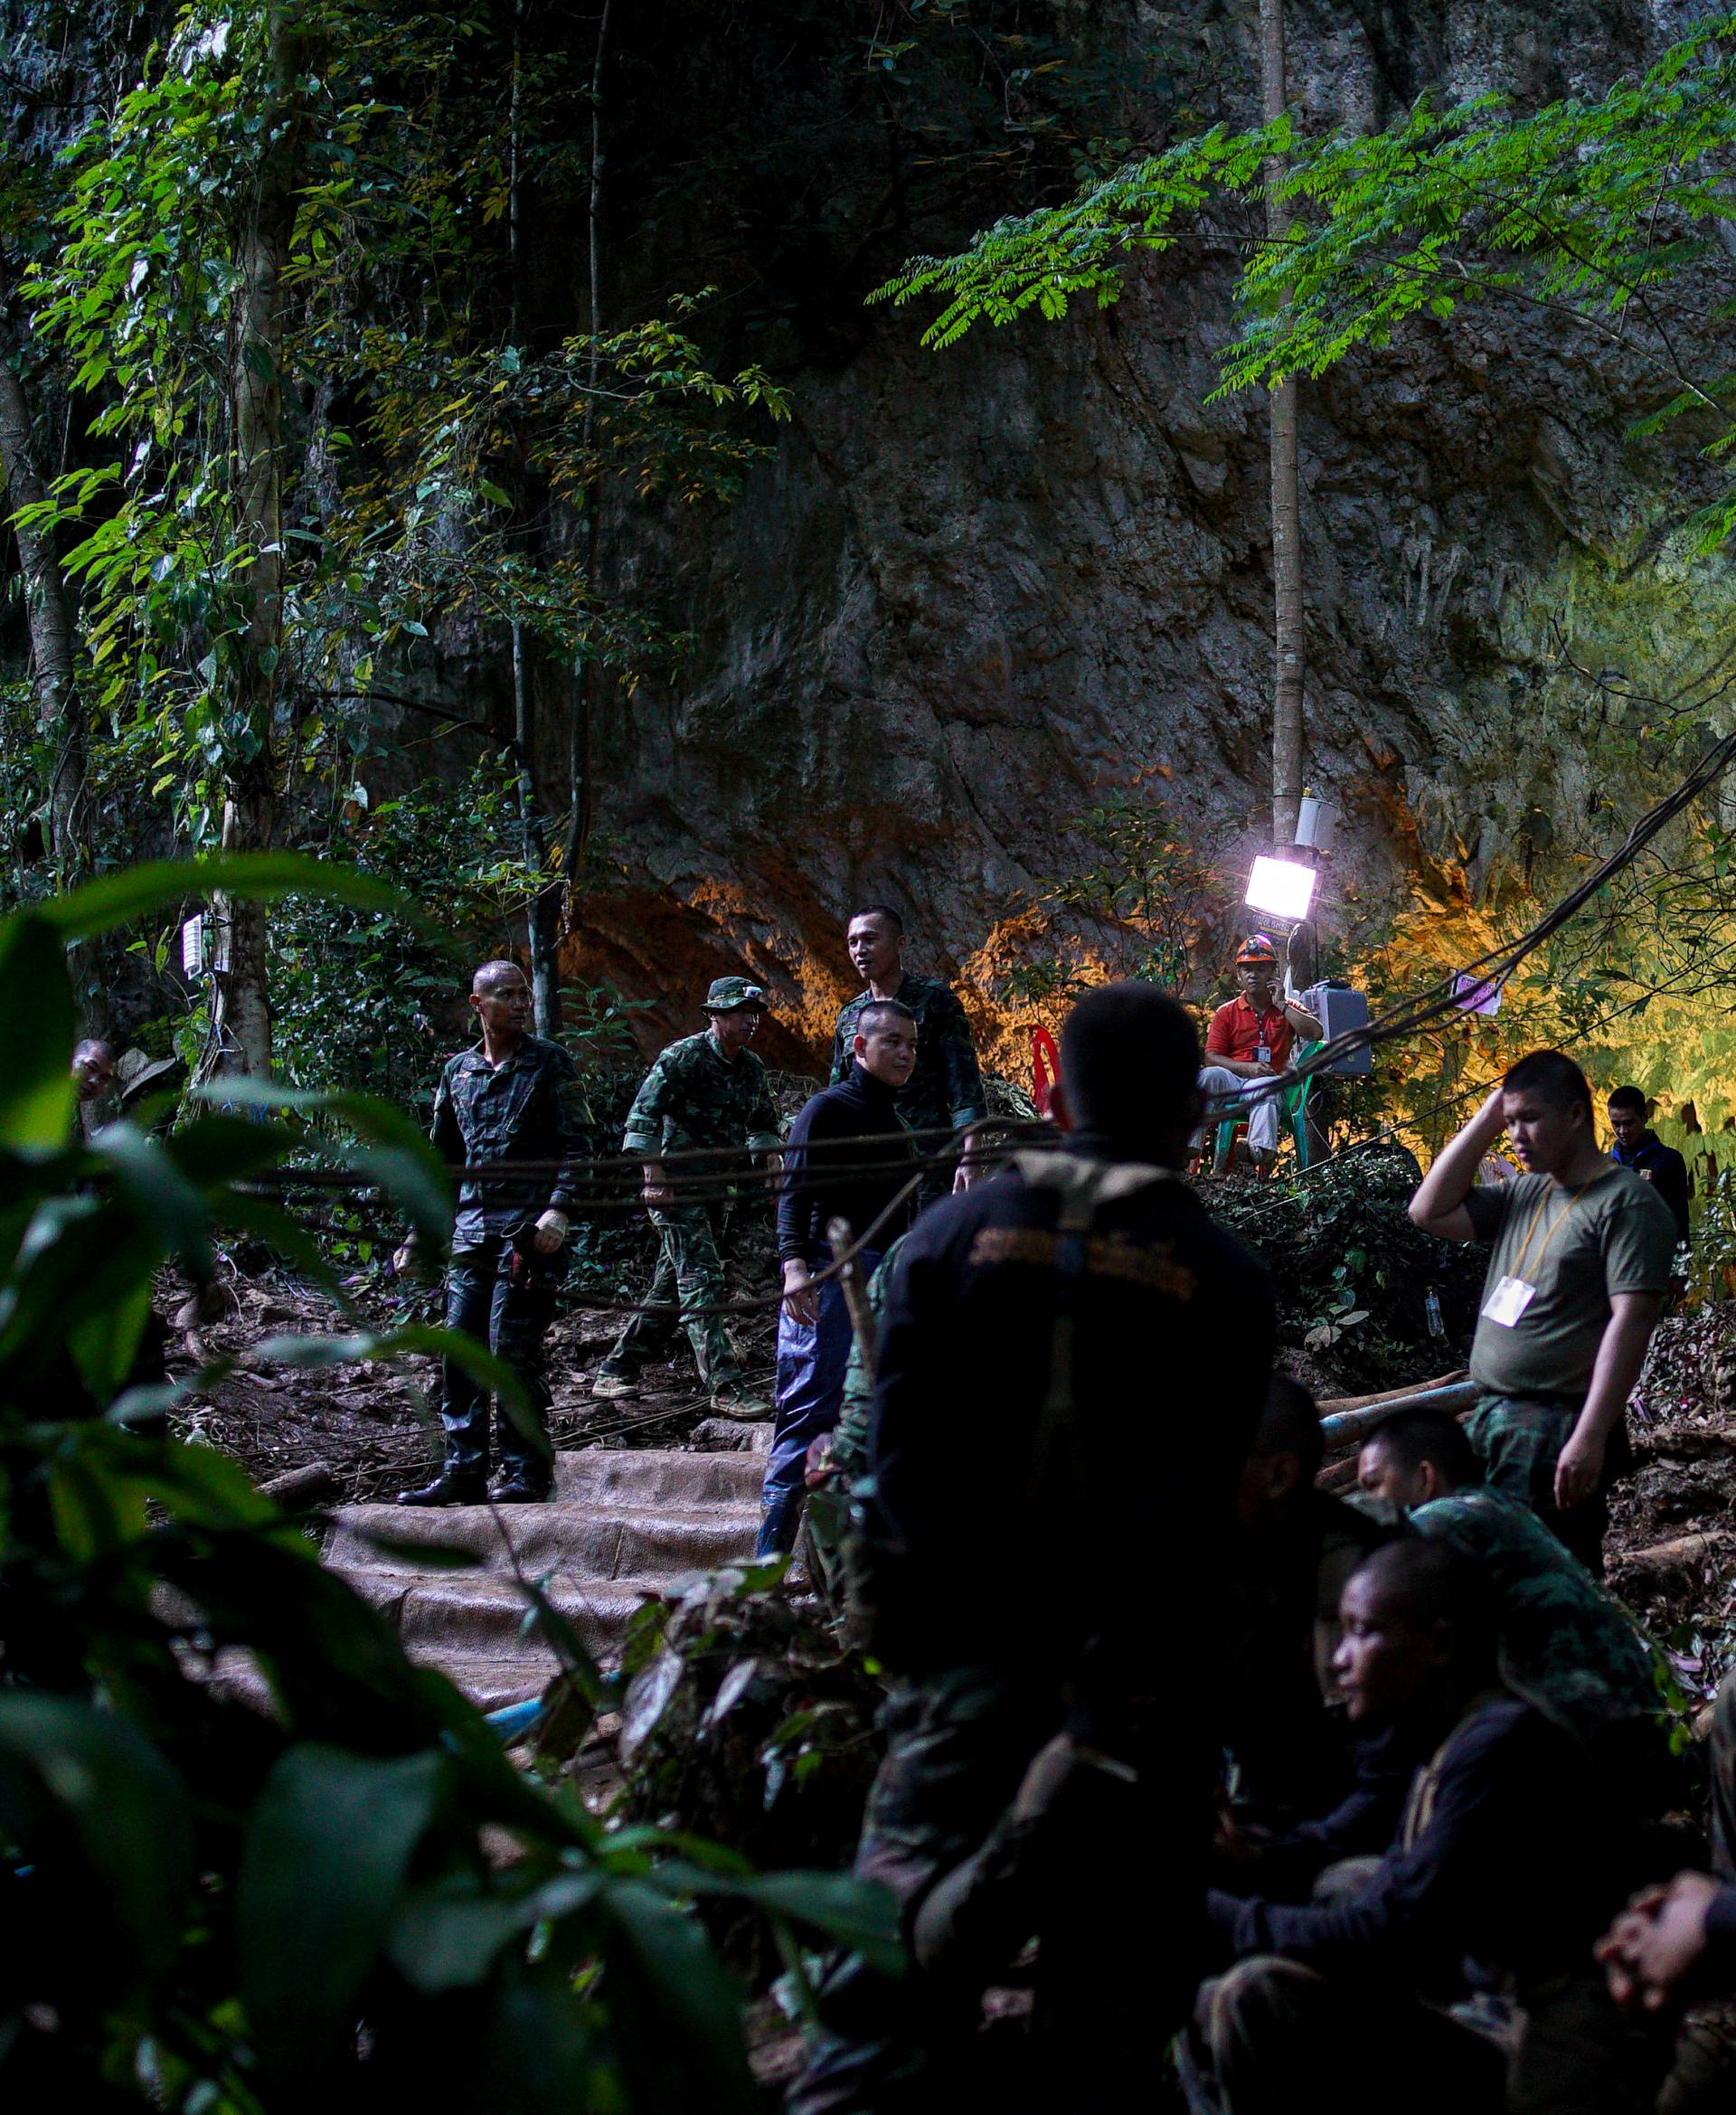 Military personnel gather as they prepare to go in to Tham Luang cave complex, as members of an under-16 soccer team and their coach have been found alive according to local media in the northern province of Chiang Rai